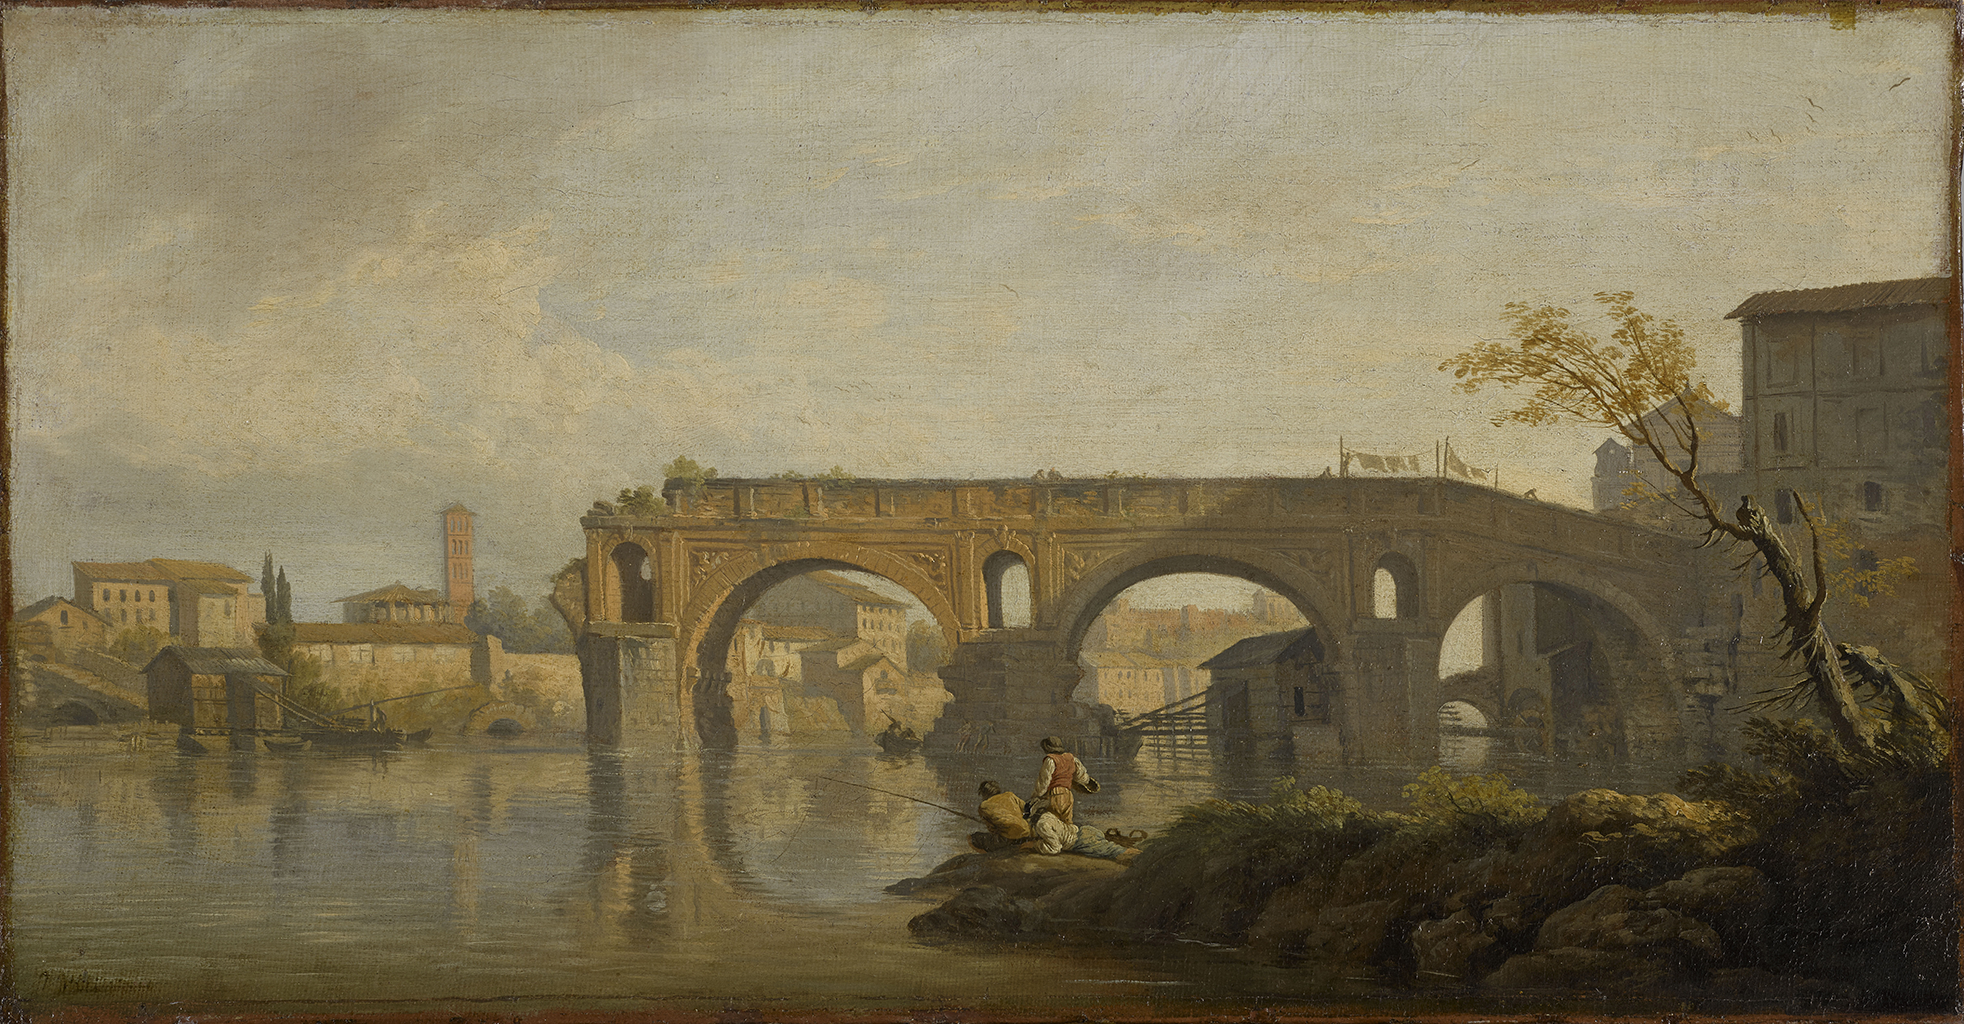 A landscape painting depicting the ruins of a large Roman arched bridge reflected in a river. In the foreground are three figures sitting and fishing on a grassy bank. In the distance is a town with red roofs and a tower. A cloudy sky, perhaps threatening a storm, is in the top third of the picture.